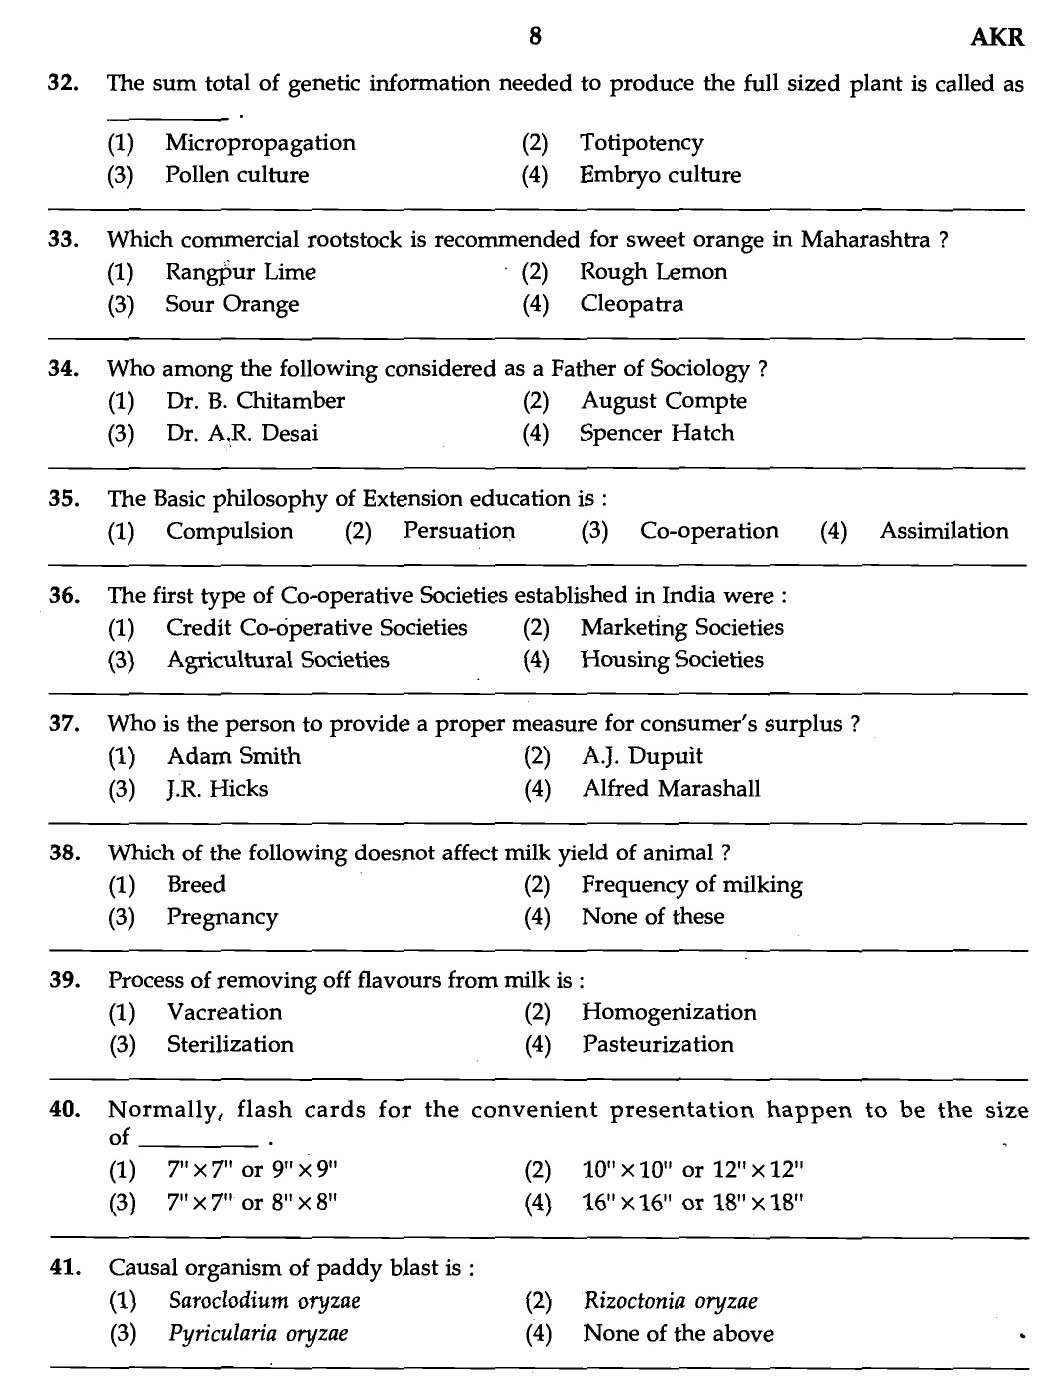 MPSC Agricultural Services Exam 2007 Question Paper Agriculture 6